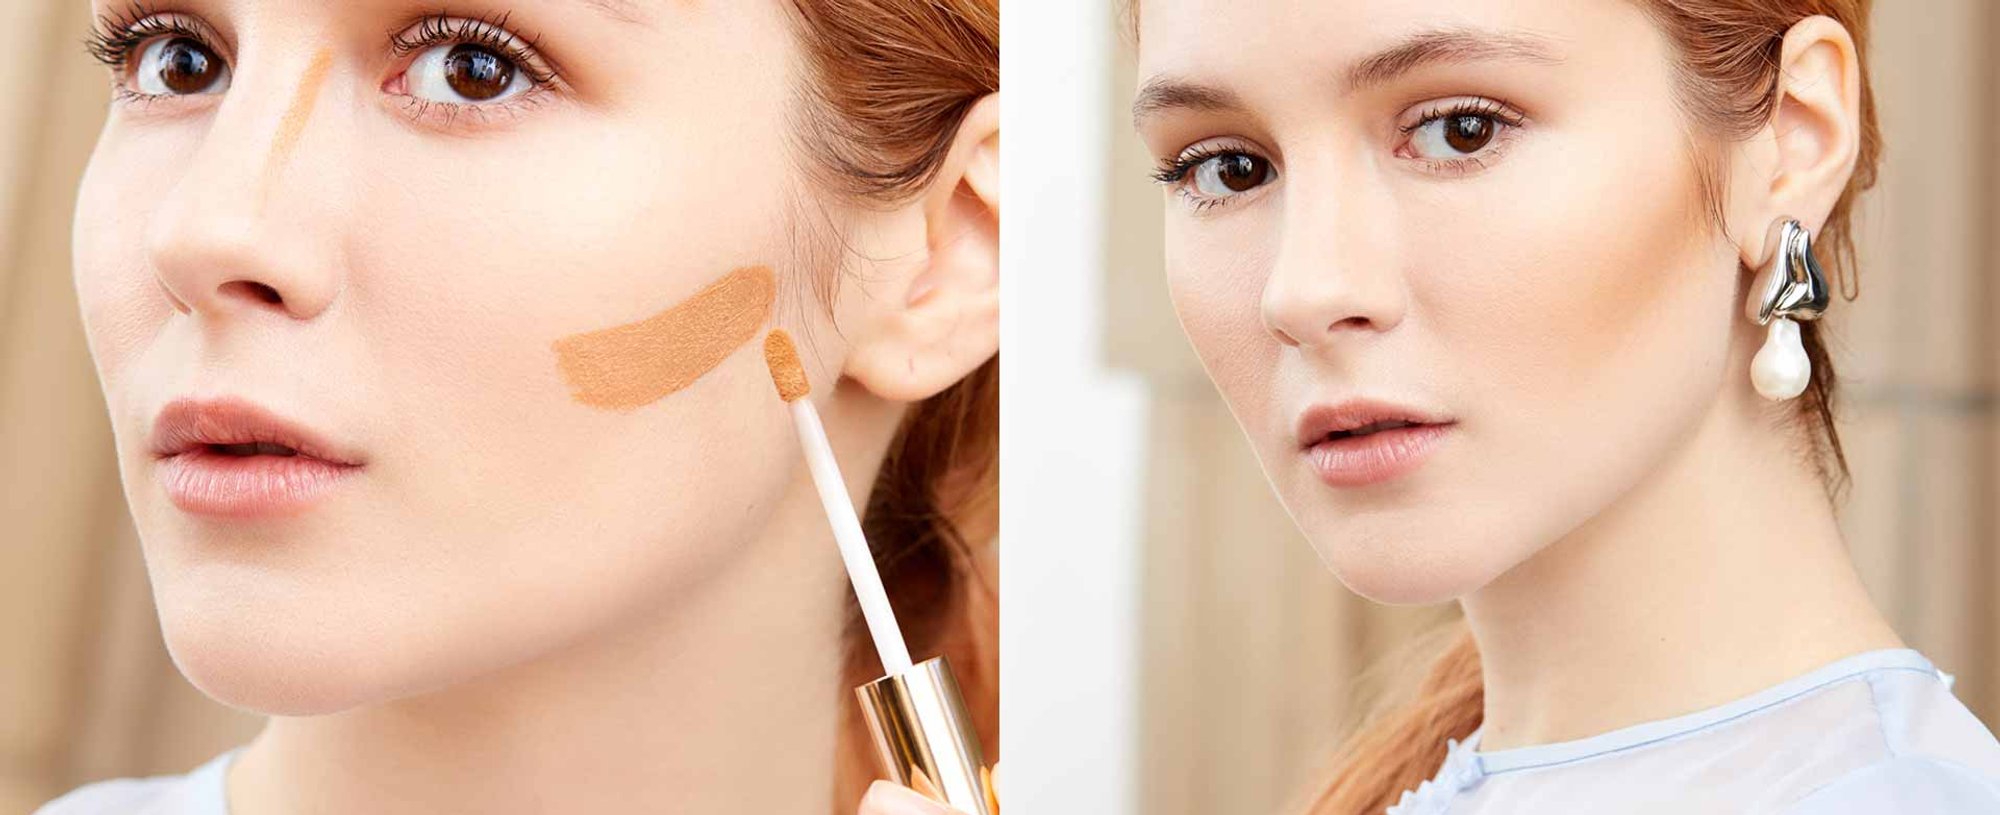 Bronzer vs. Contour — What Experts Want You to Know